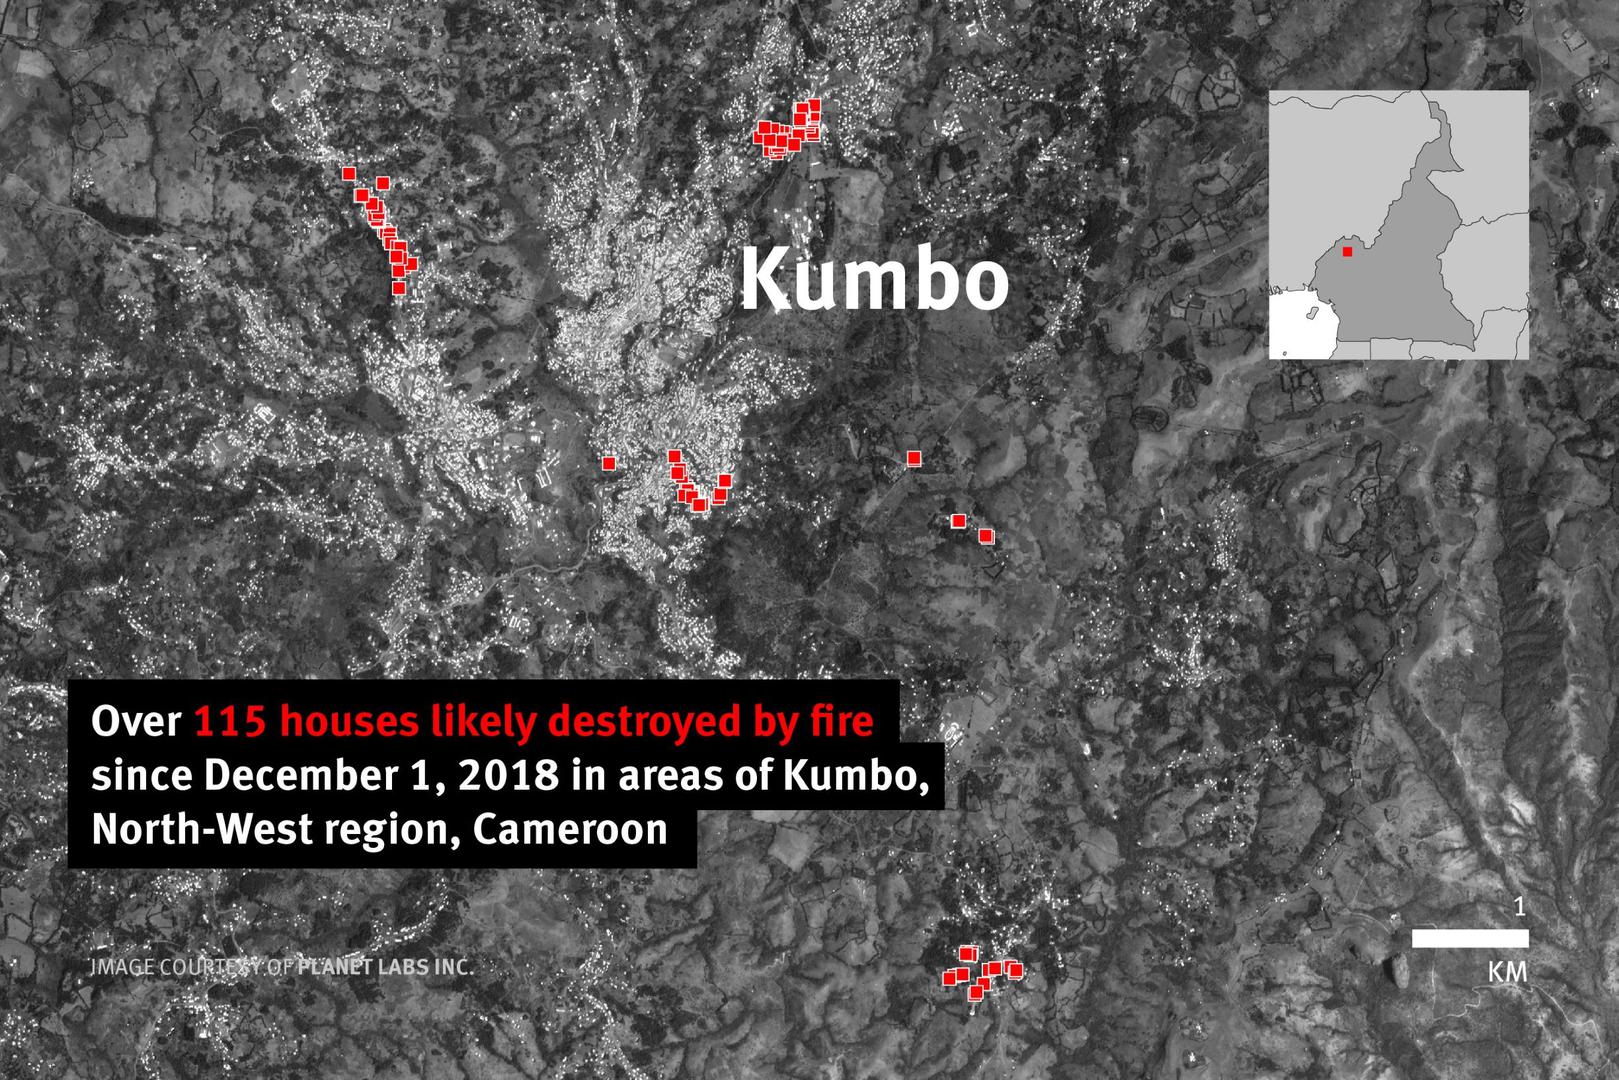 Over 115 houses likely destroyed by fire since December 1, 2018 in areas of Kumbo, North West region, Cameroon